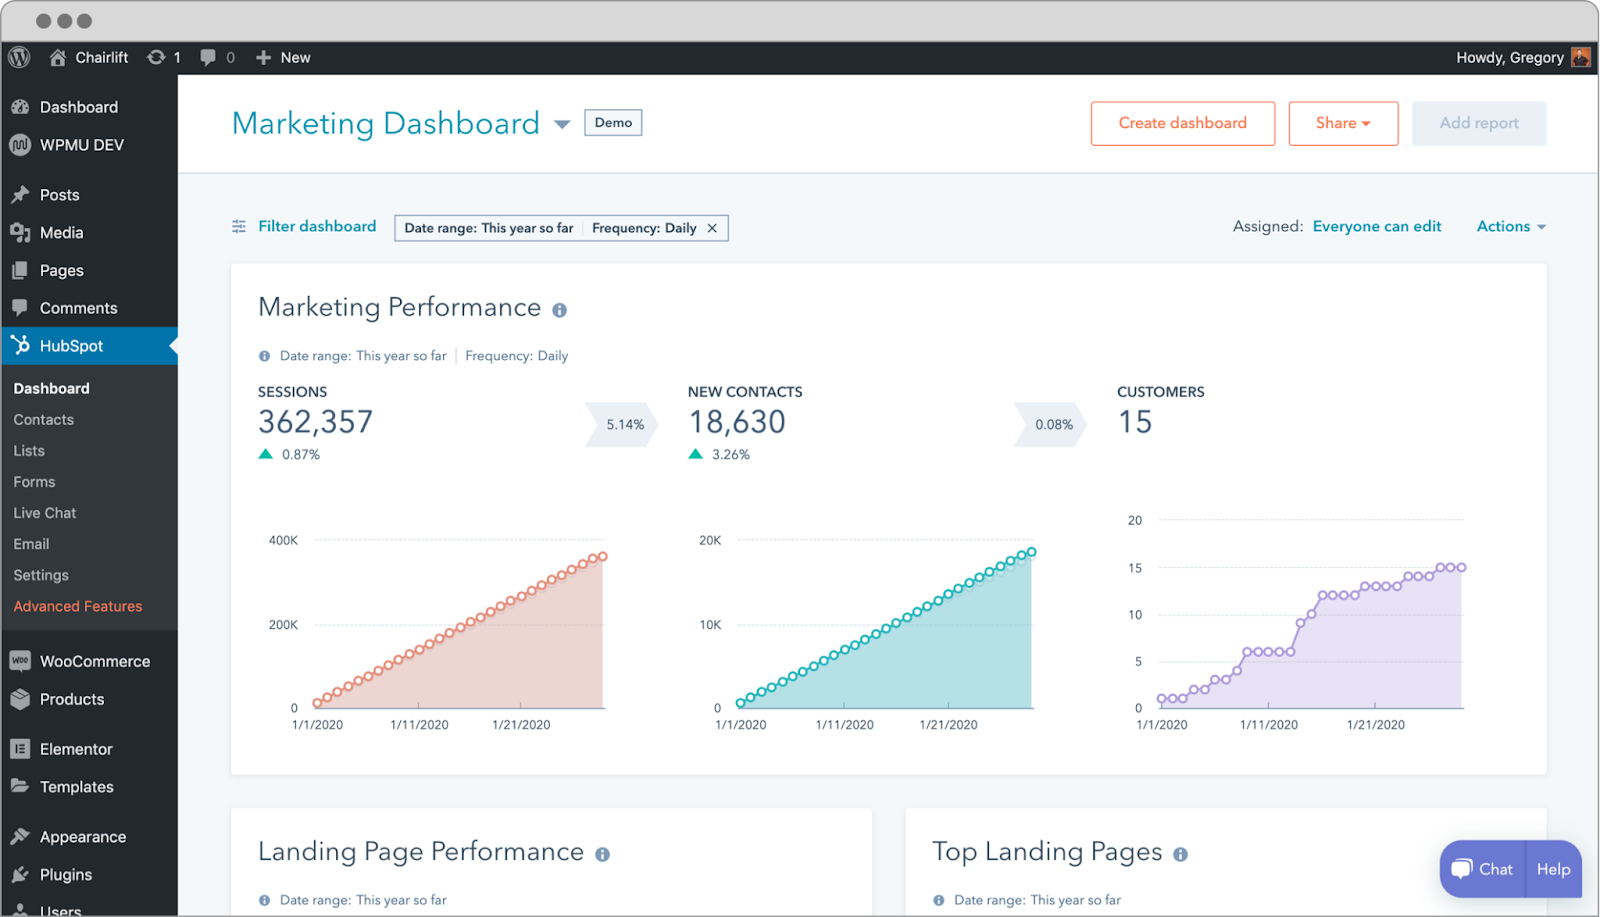 Wordpress tracker plugin, HubSpot WordPress plugin, Marketing Dashboard: The image displays the consolidated view of campaign data and insights for efficient management and data-driven decisions.